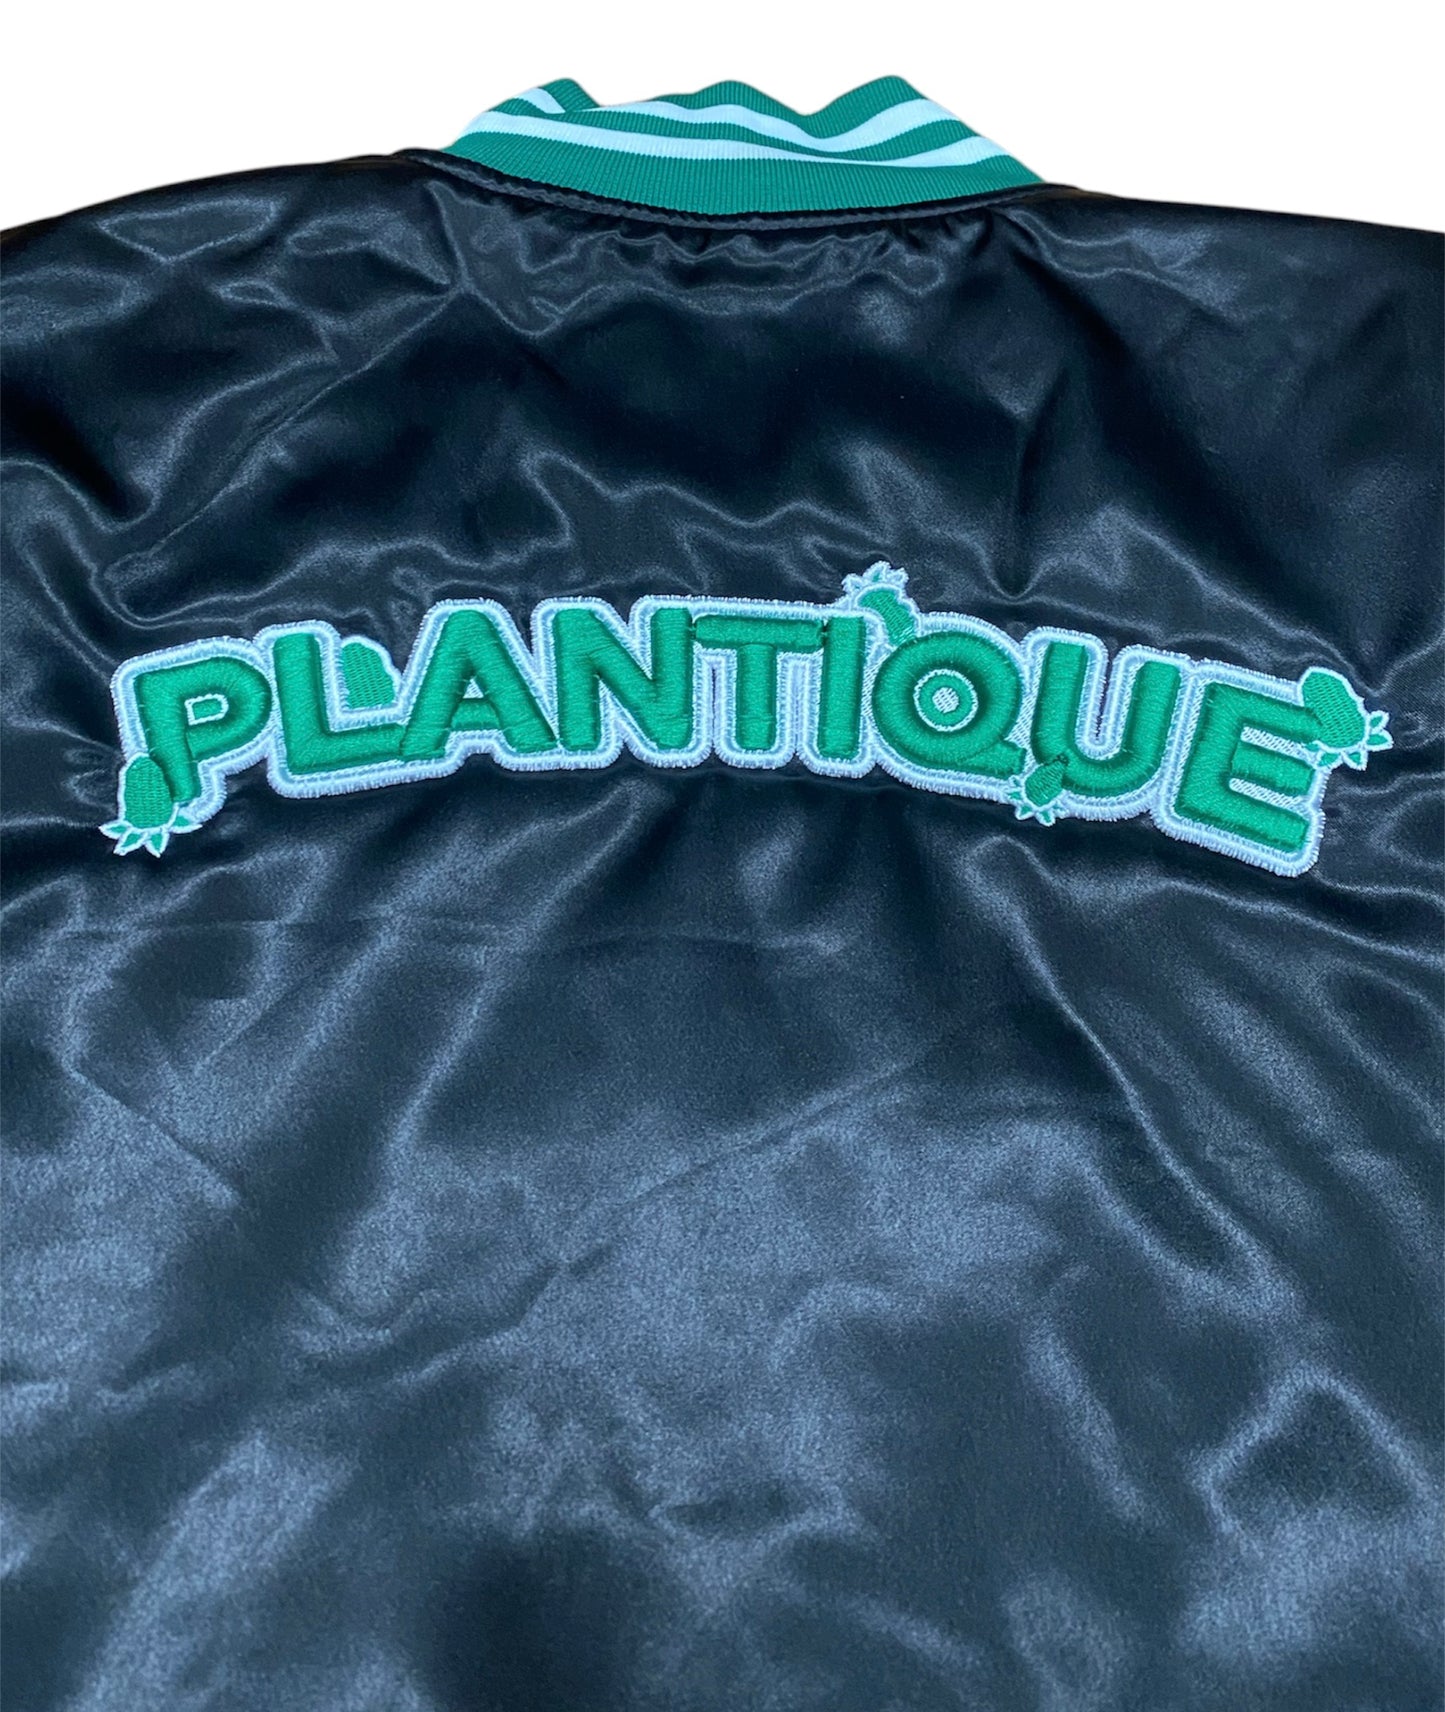 Plantique Varsity Bomber back view puff embroidery